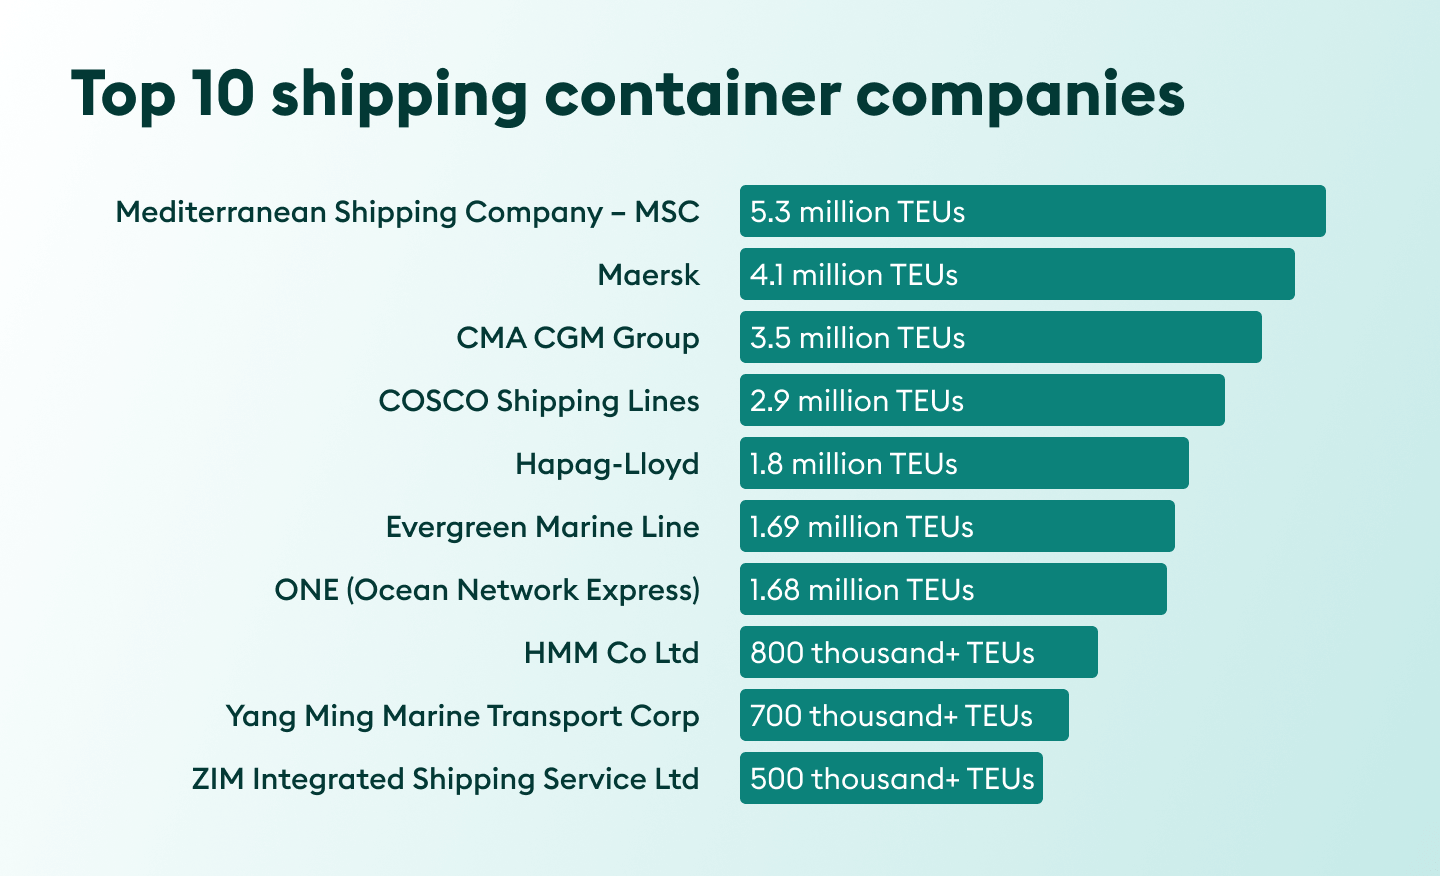 Top 10 shipping container companies